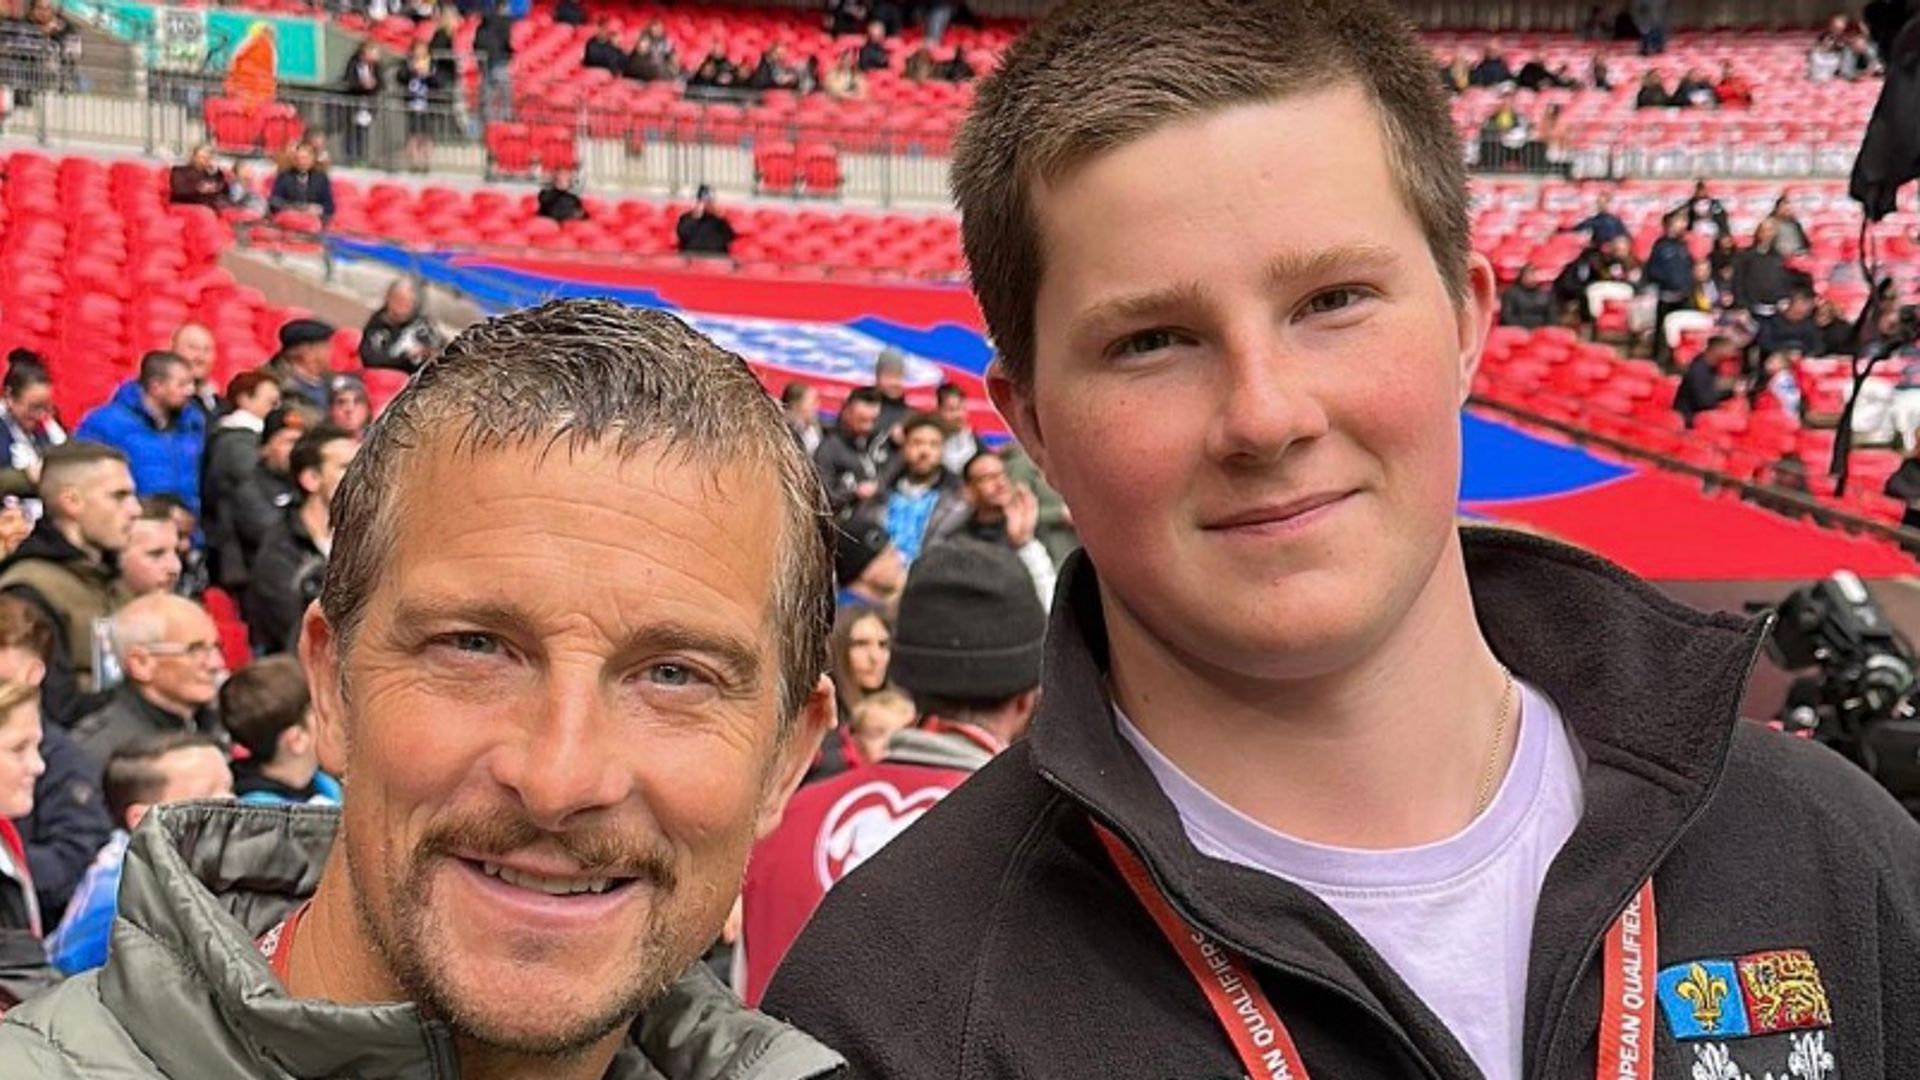 Bear Grylls' rarely-seen son towers over him in new photo on milestone day